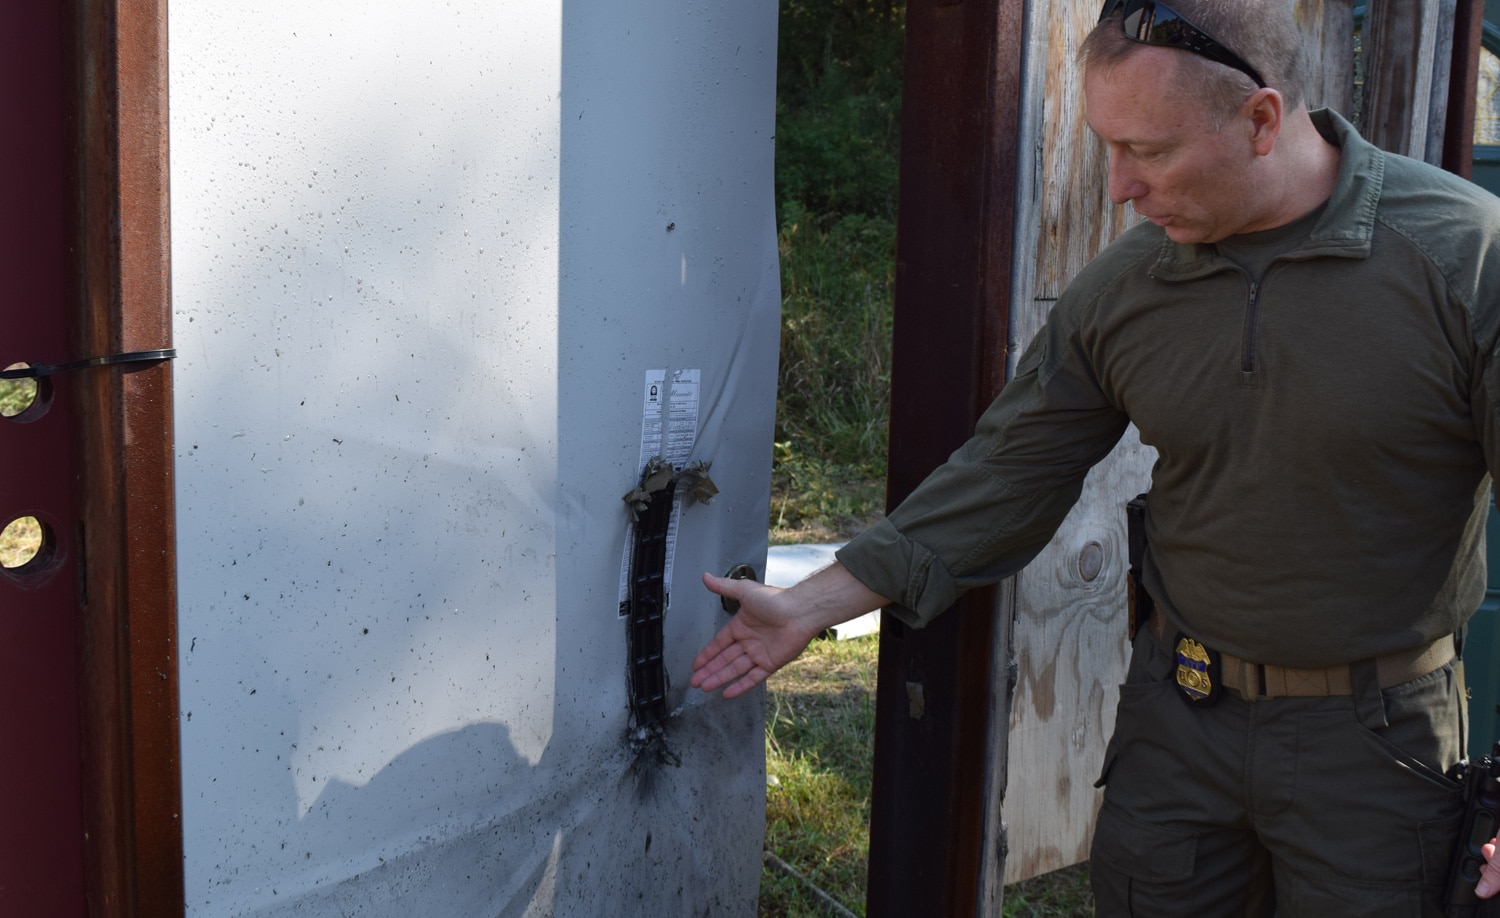 The breach bomb is designed to do just enough damage to open the door. SRT agents practice on a variety of doors in order to understand the science and art of breaching. (Photo: Daniel Terrill/Guns.com)